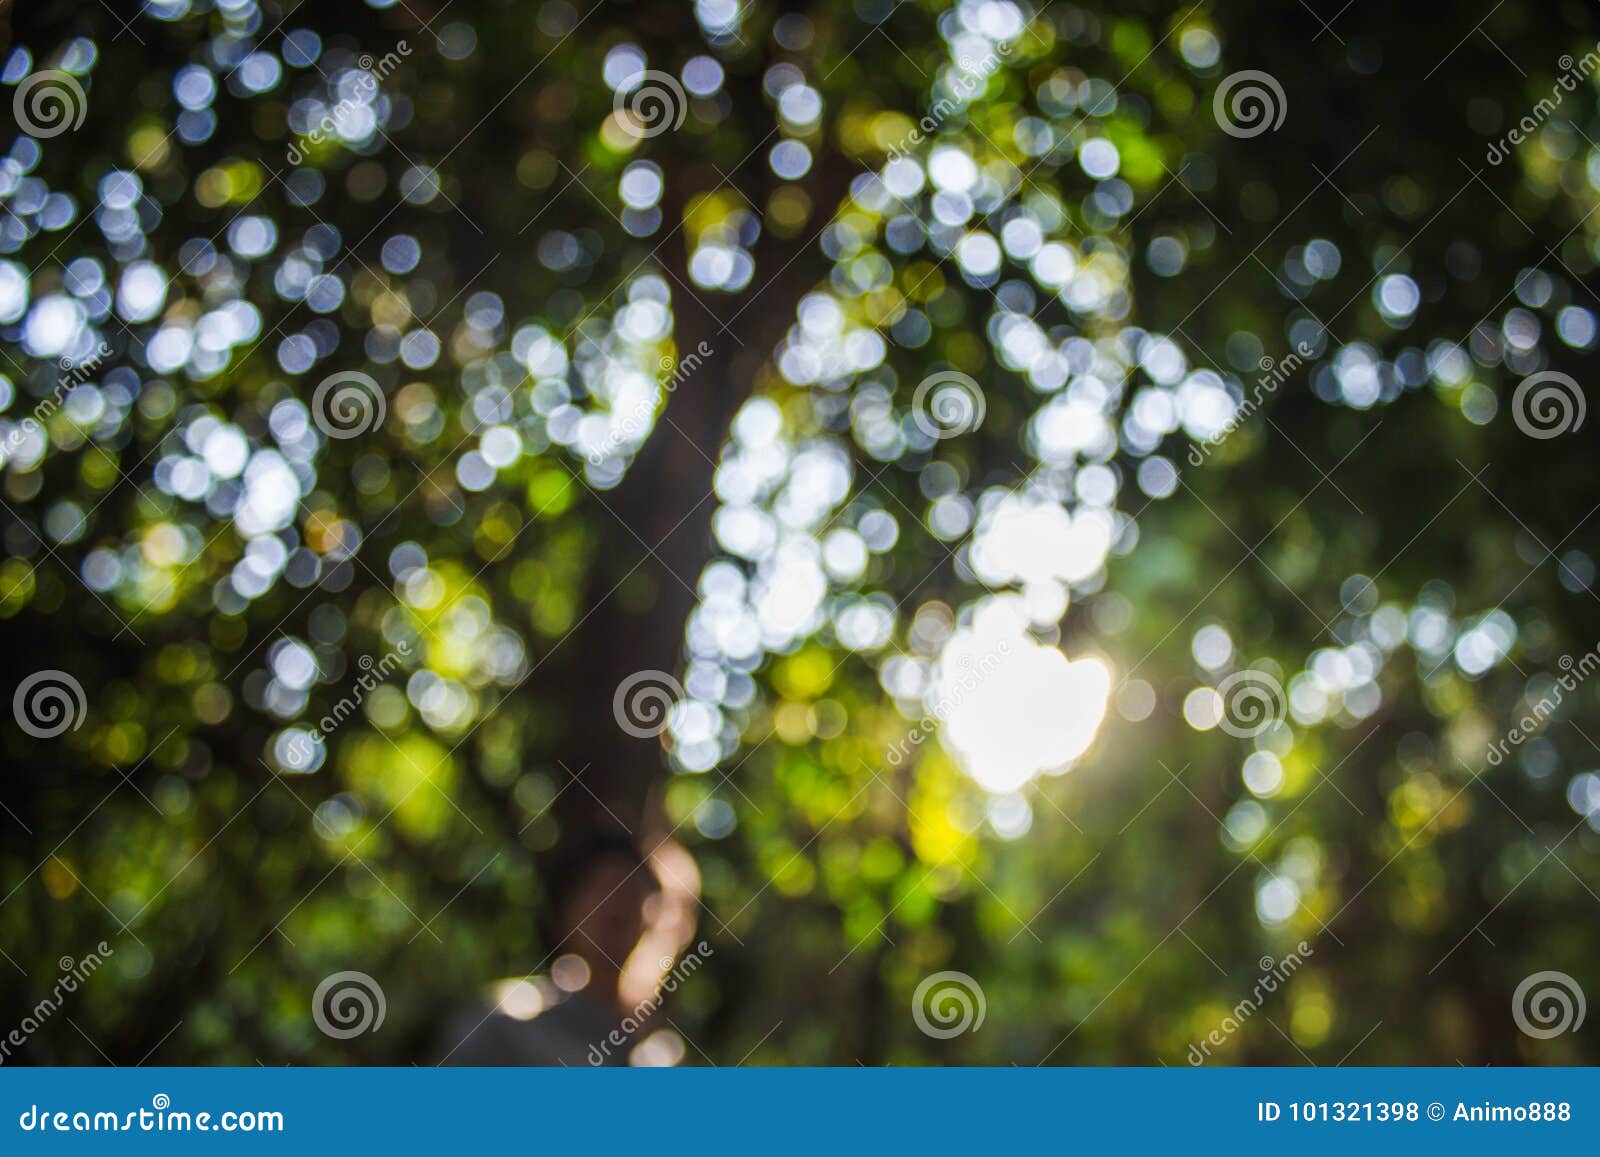 Light and Bokeh in the Forest Stock Photo - Image of green, sunlight ...